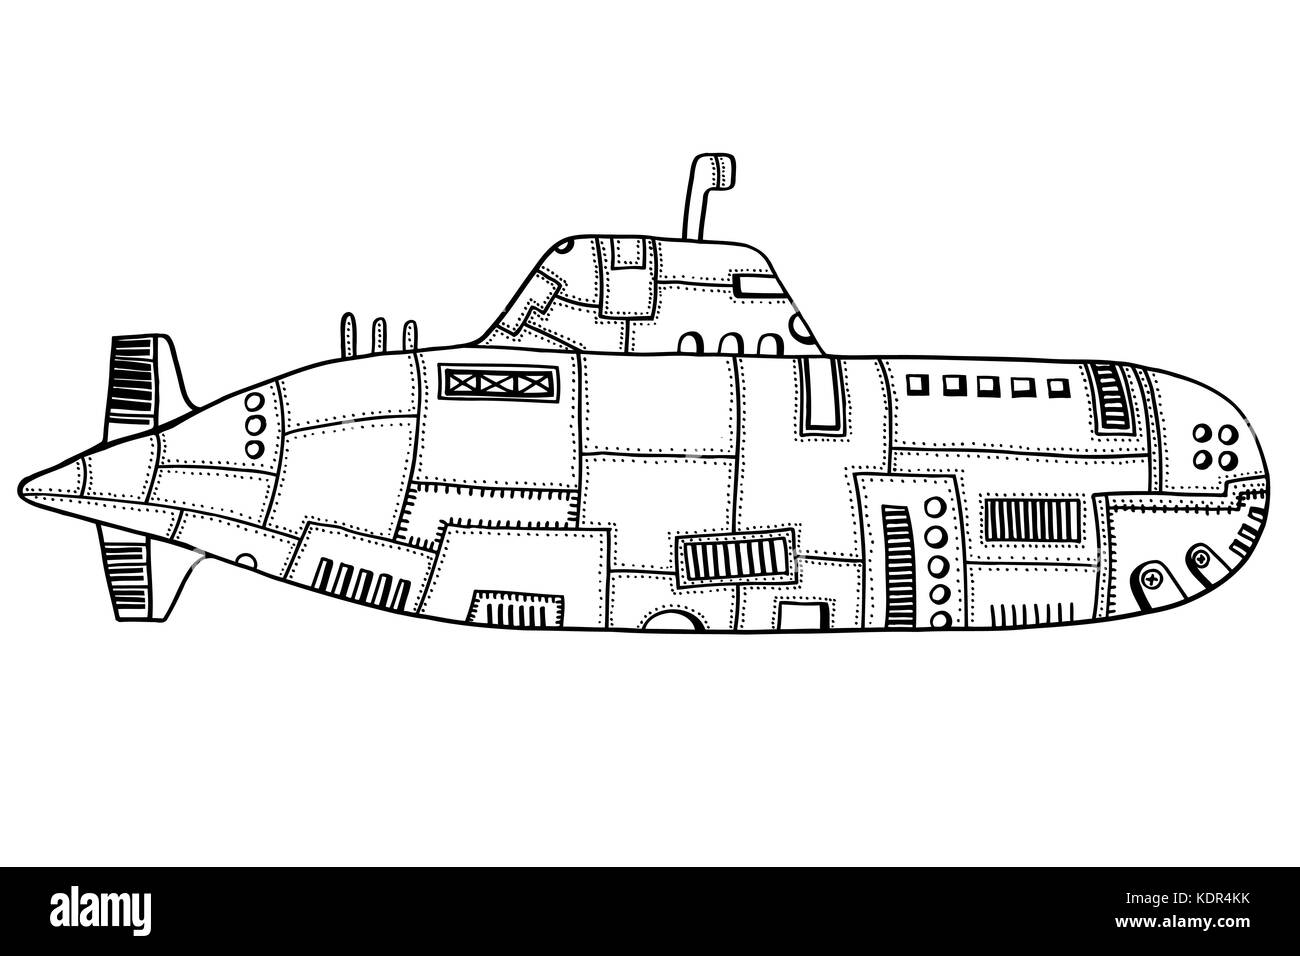 Monochrome Doodle Sketch of old Submarine Vector Illustration Art Stock Vector